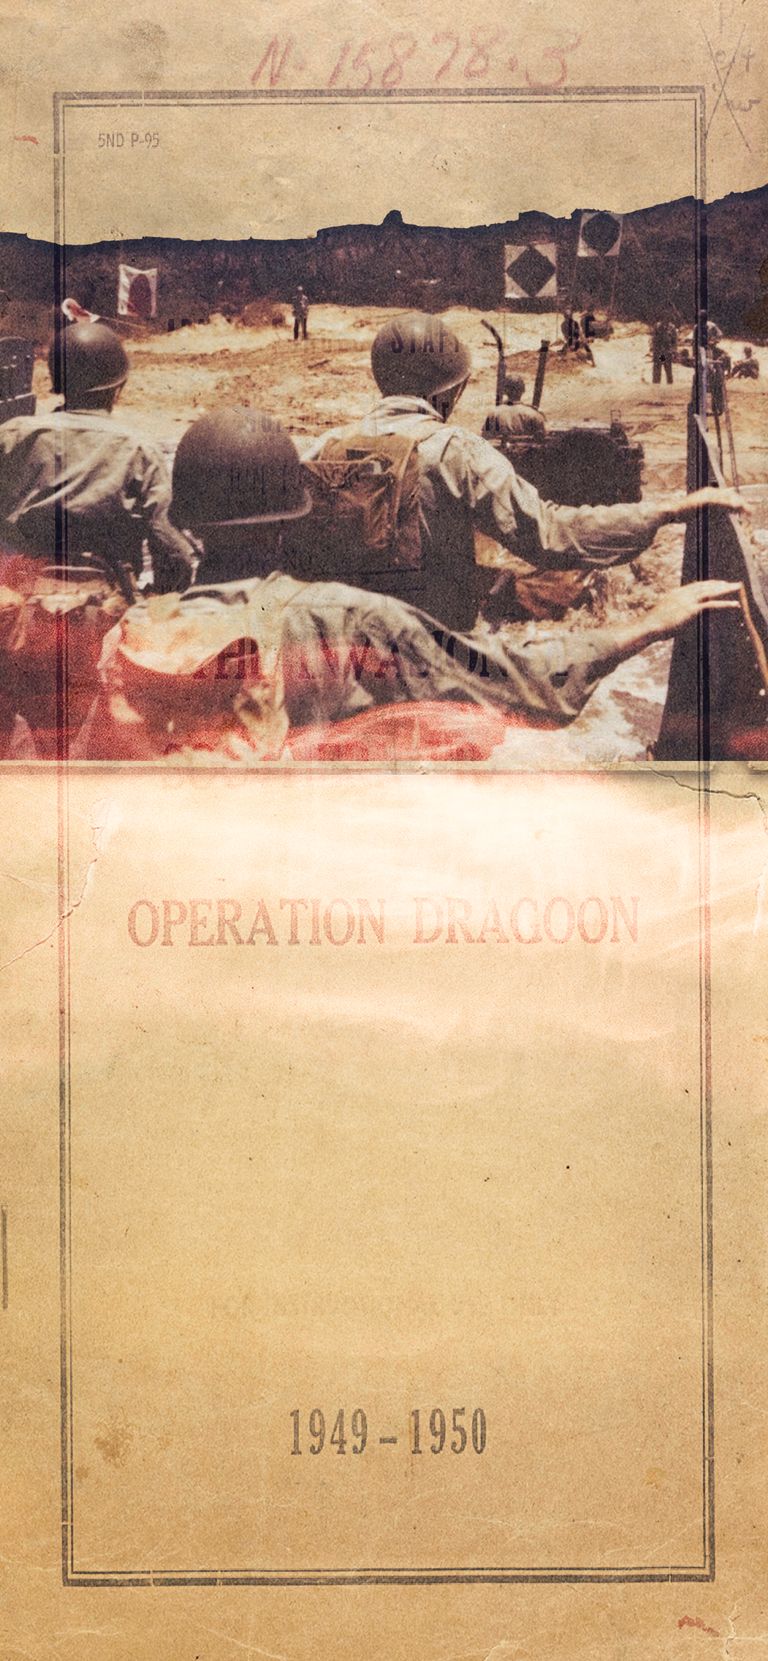 Operation Dragoon: The Other D-Day